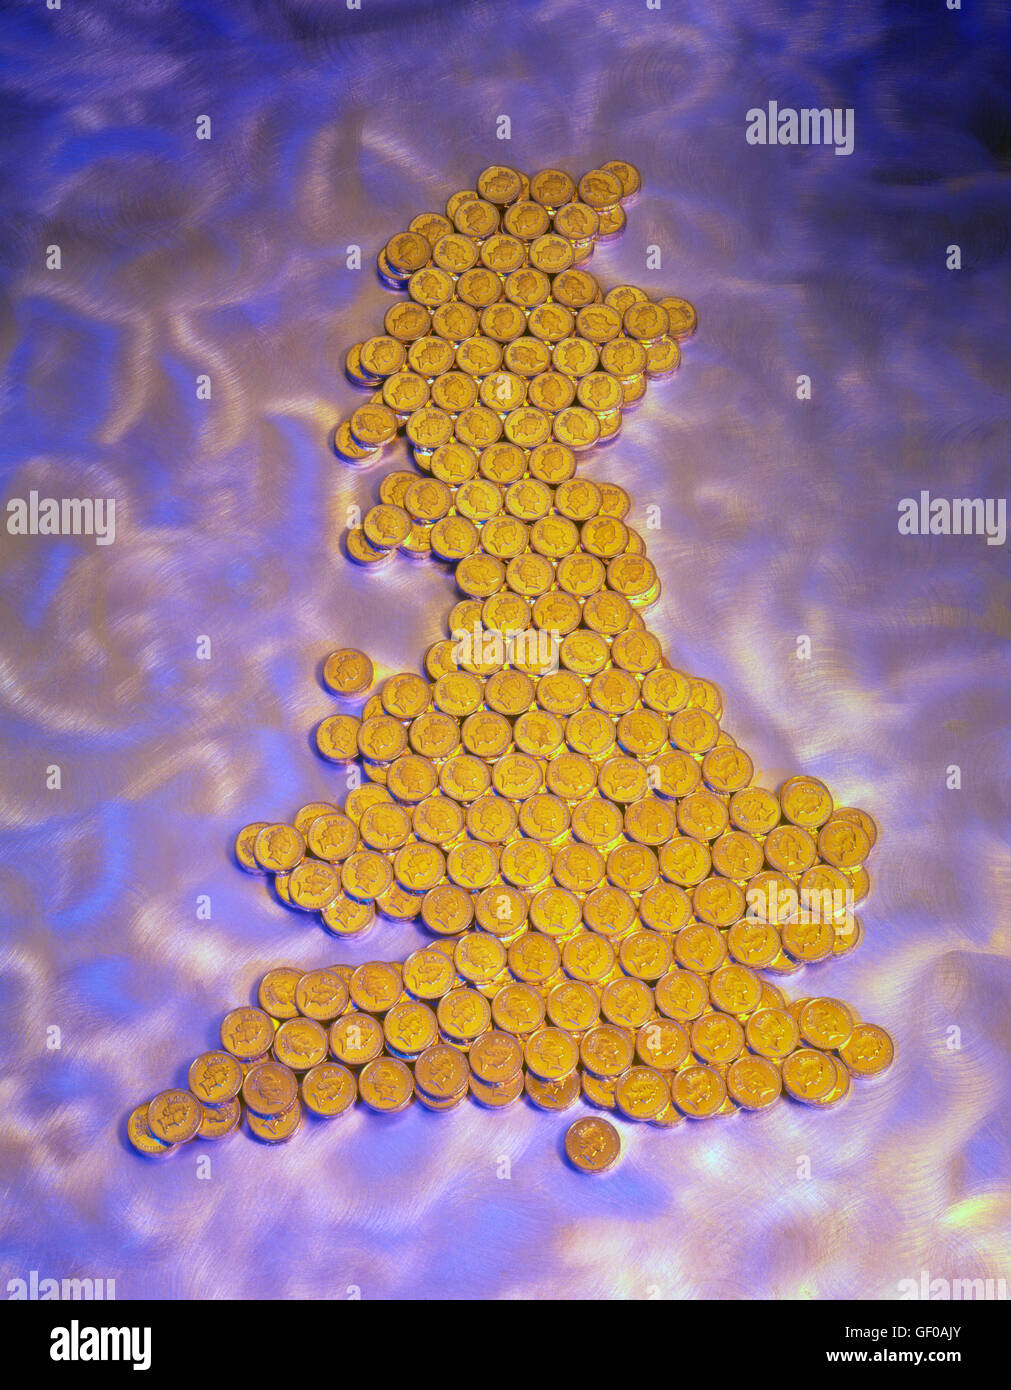 Pound coins in the shape of the British Isles, England, Wales and Scotland Stock Photo